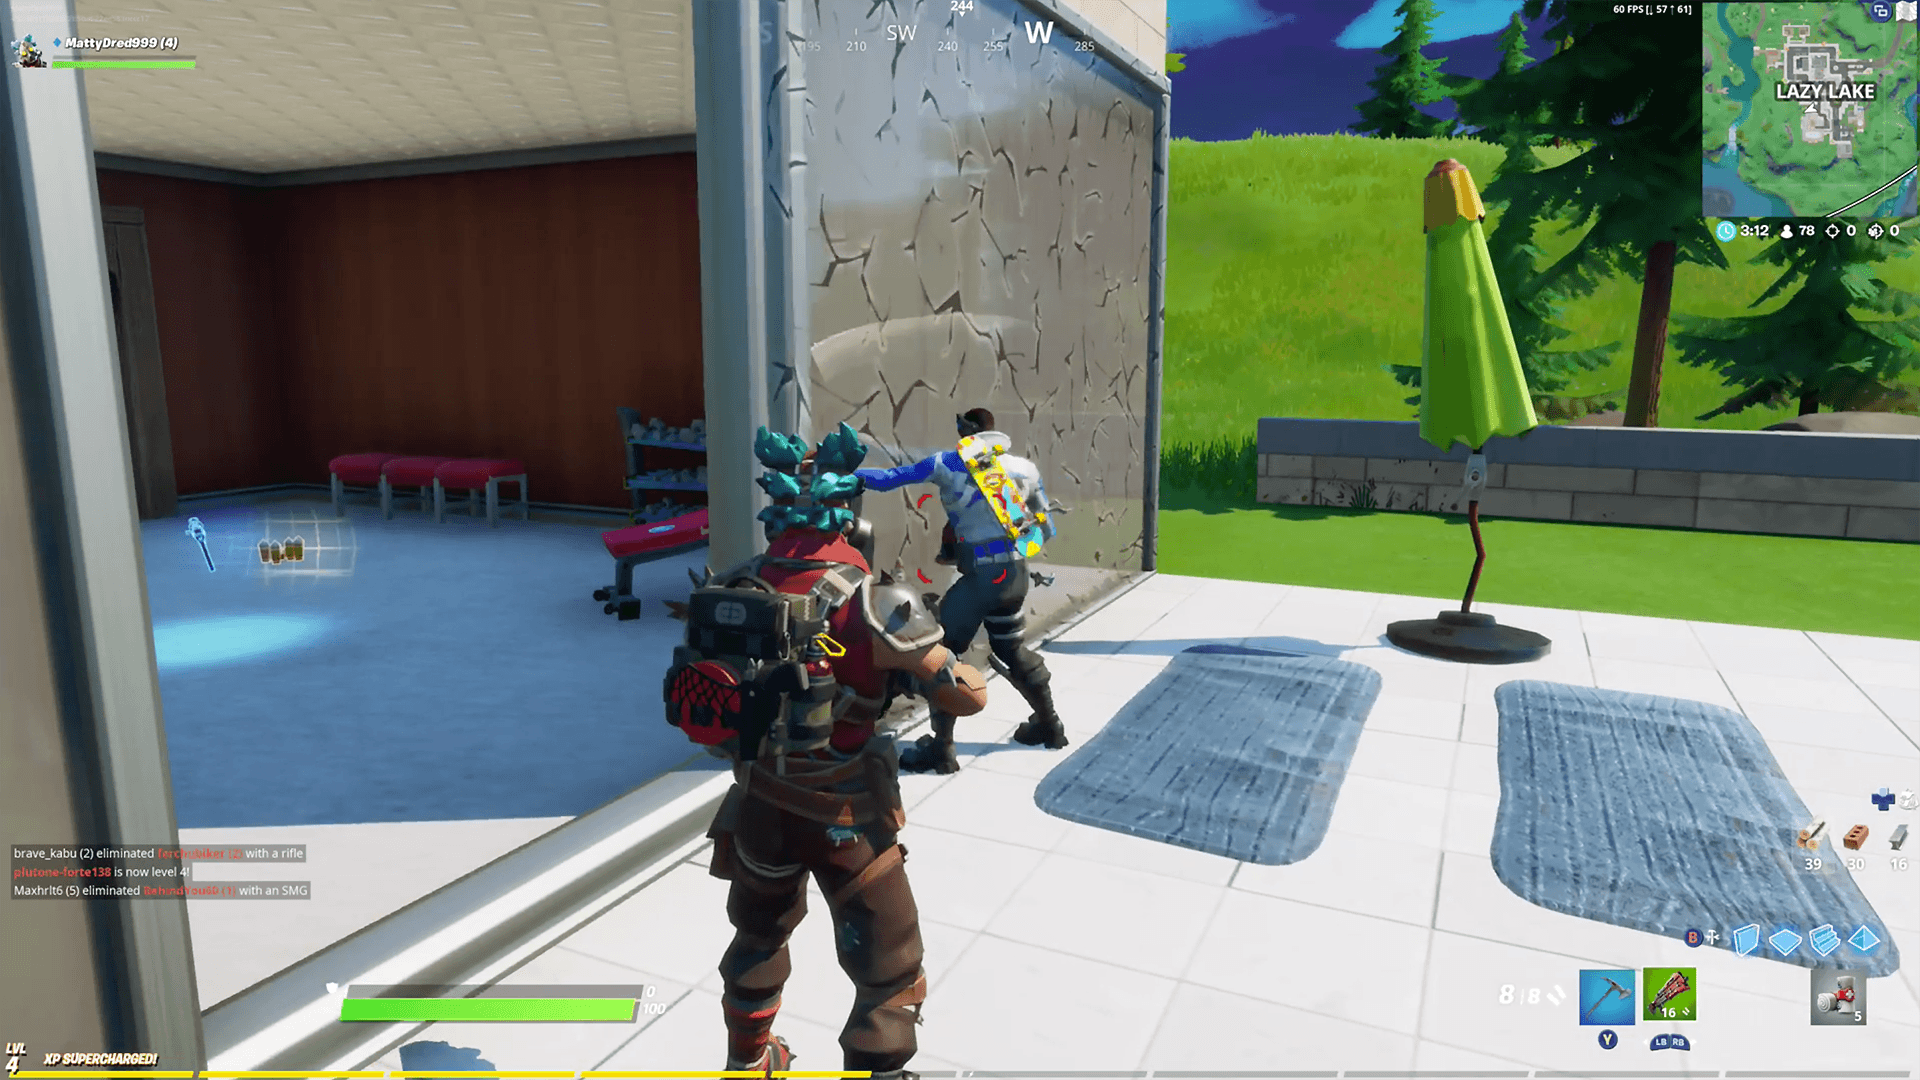 Yes, there are bots in Fortnite Chapter 2 and they are awful